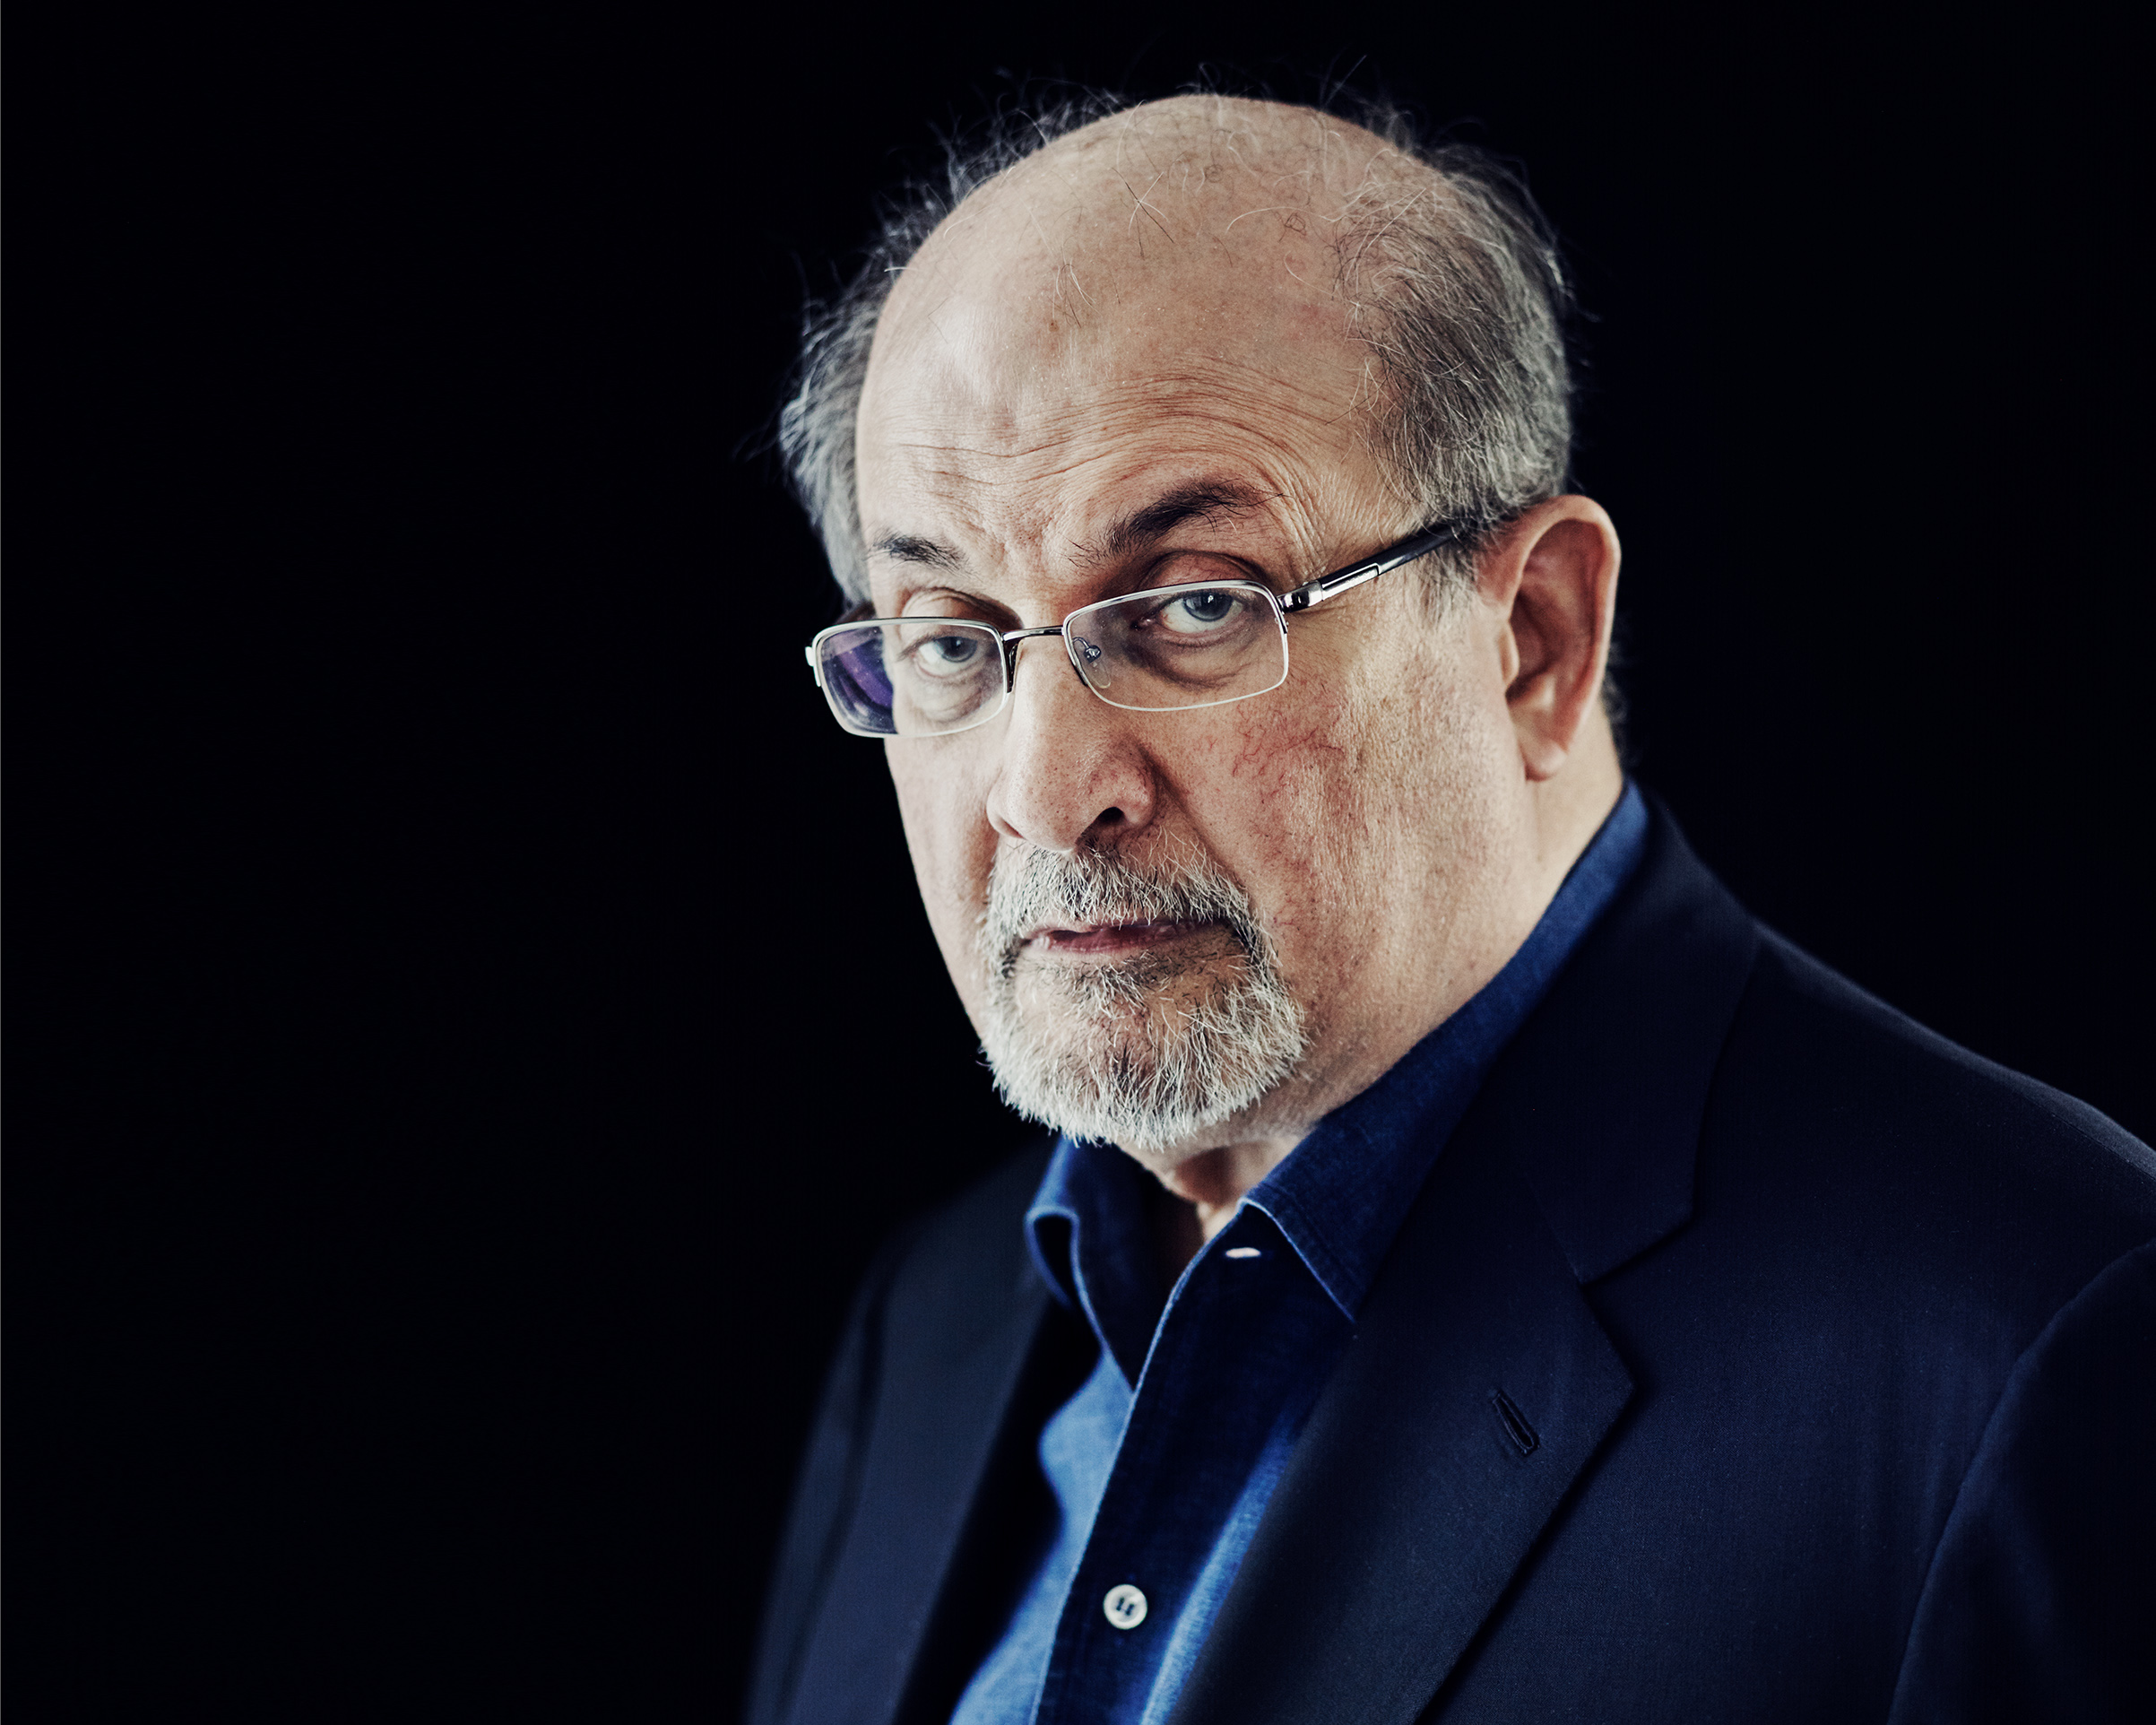 Salman Rushdie photographed in New York City, September 7, 2017 (Thomas Prior for TIME)